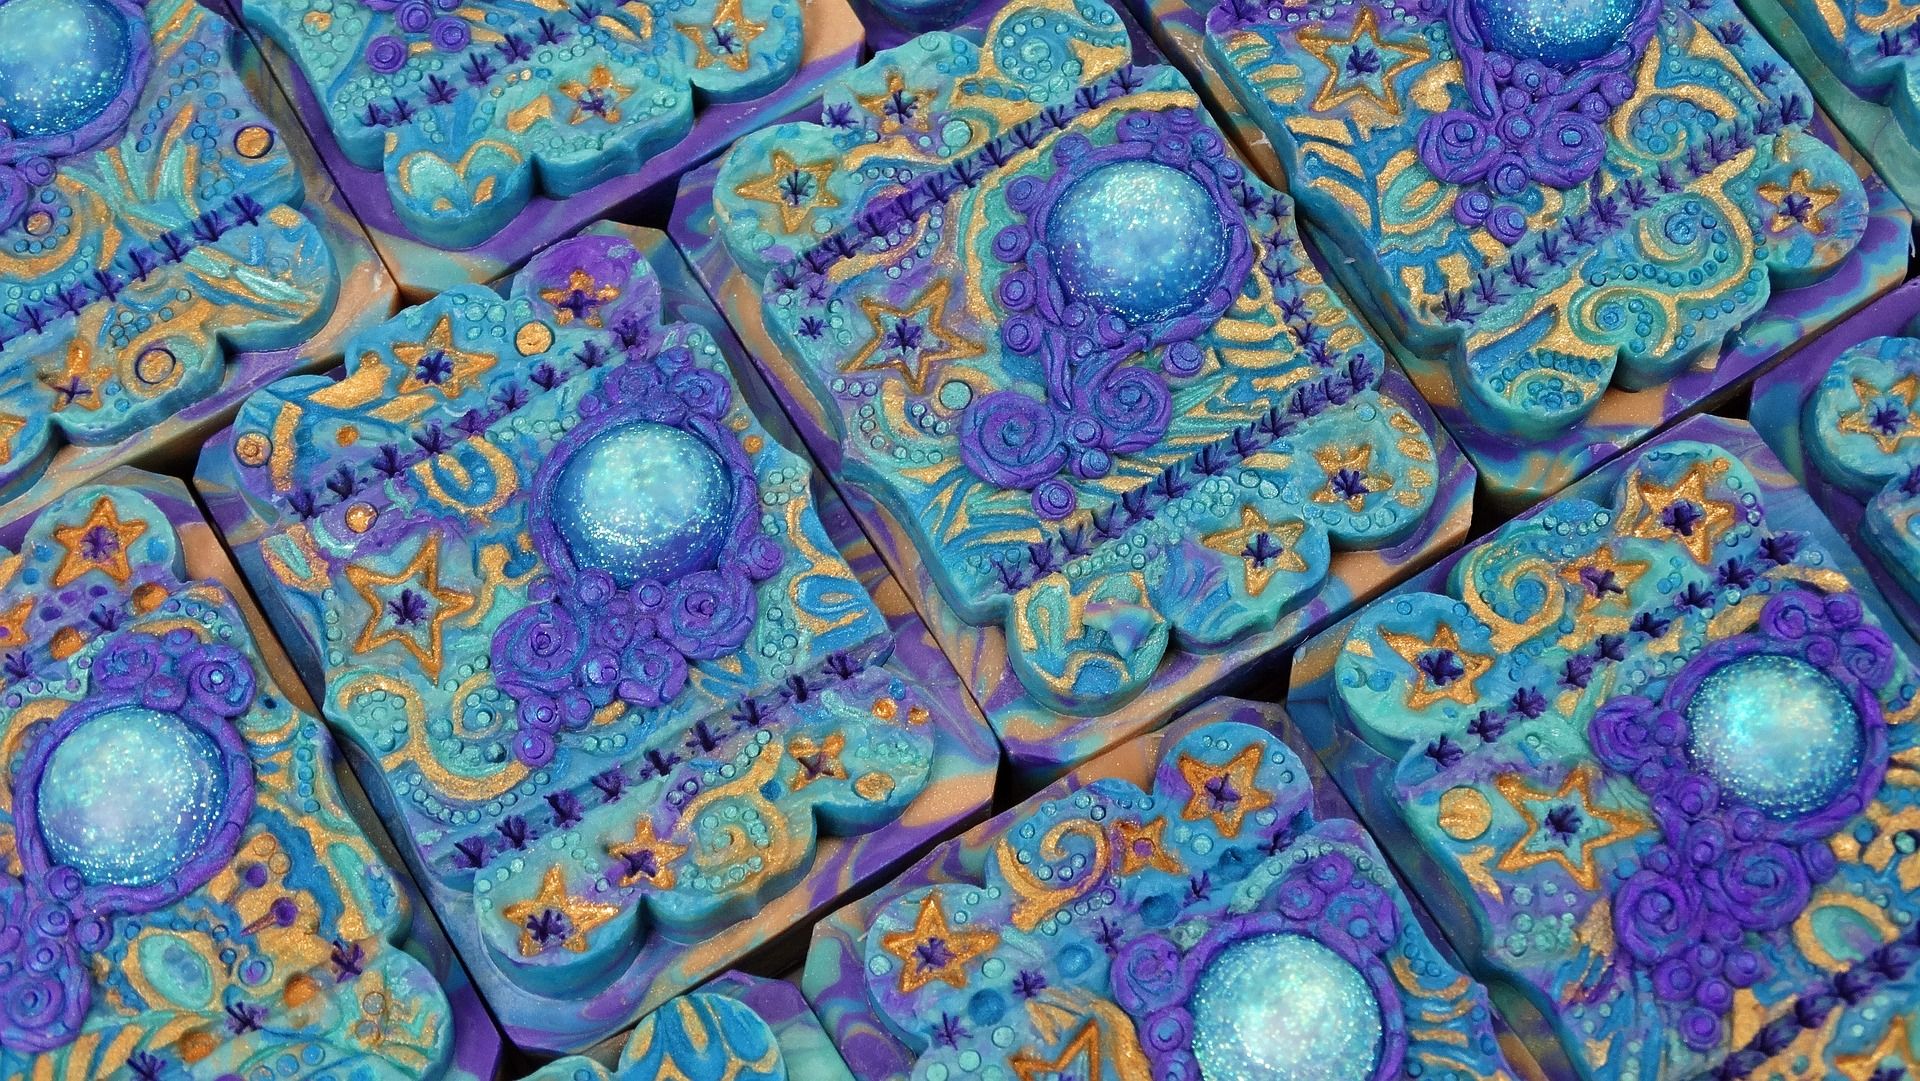 Carved soaps